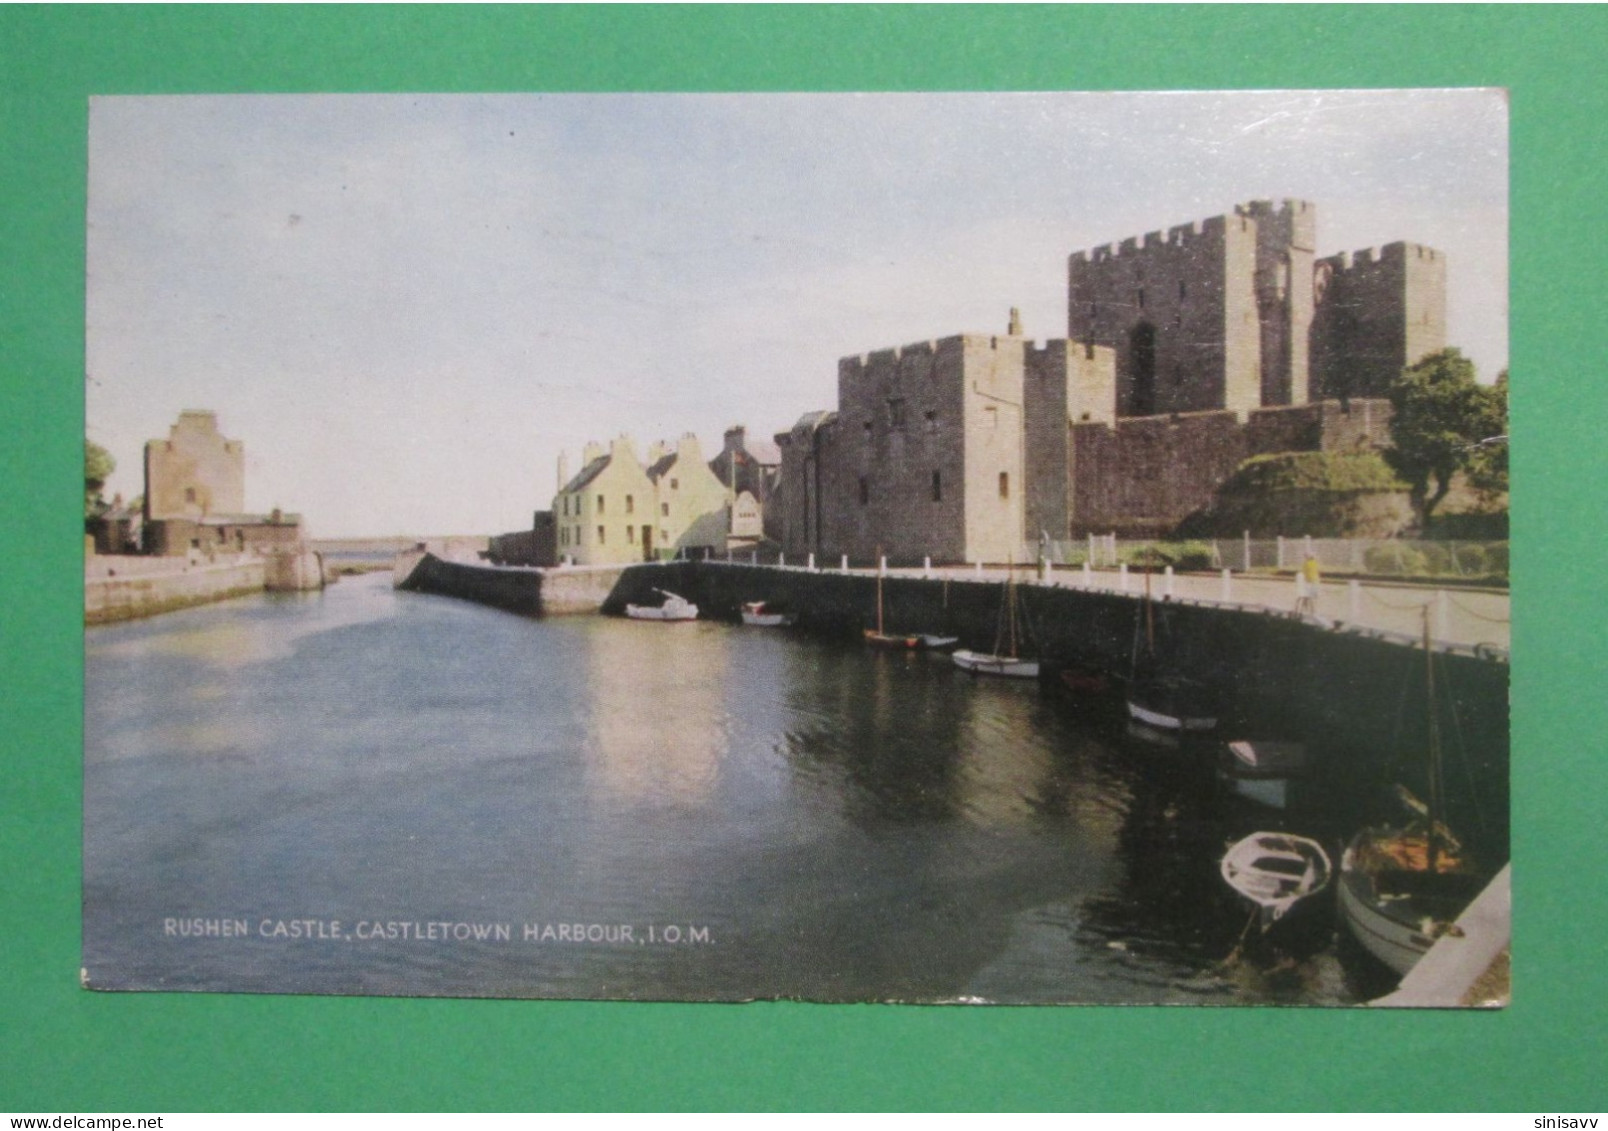 CASTLETOWN - Castle Rushen And Harbour - Isle Of Man